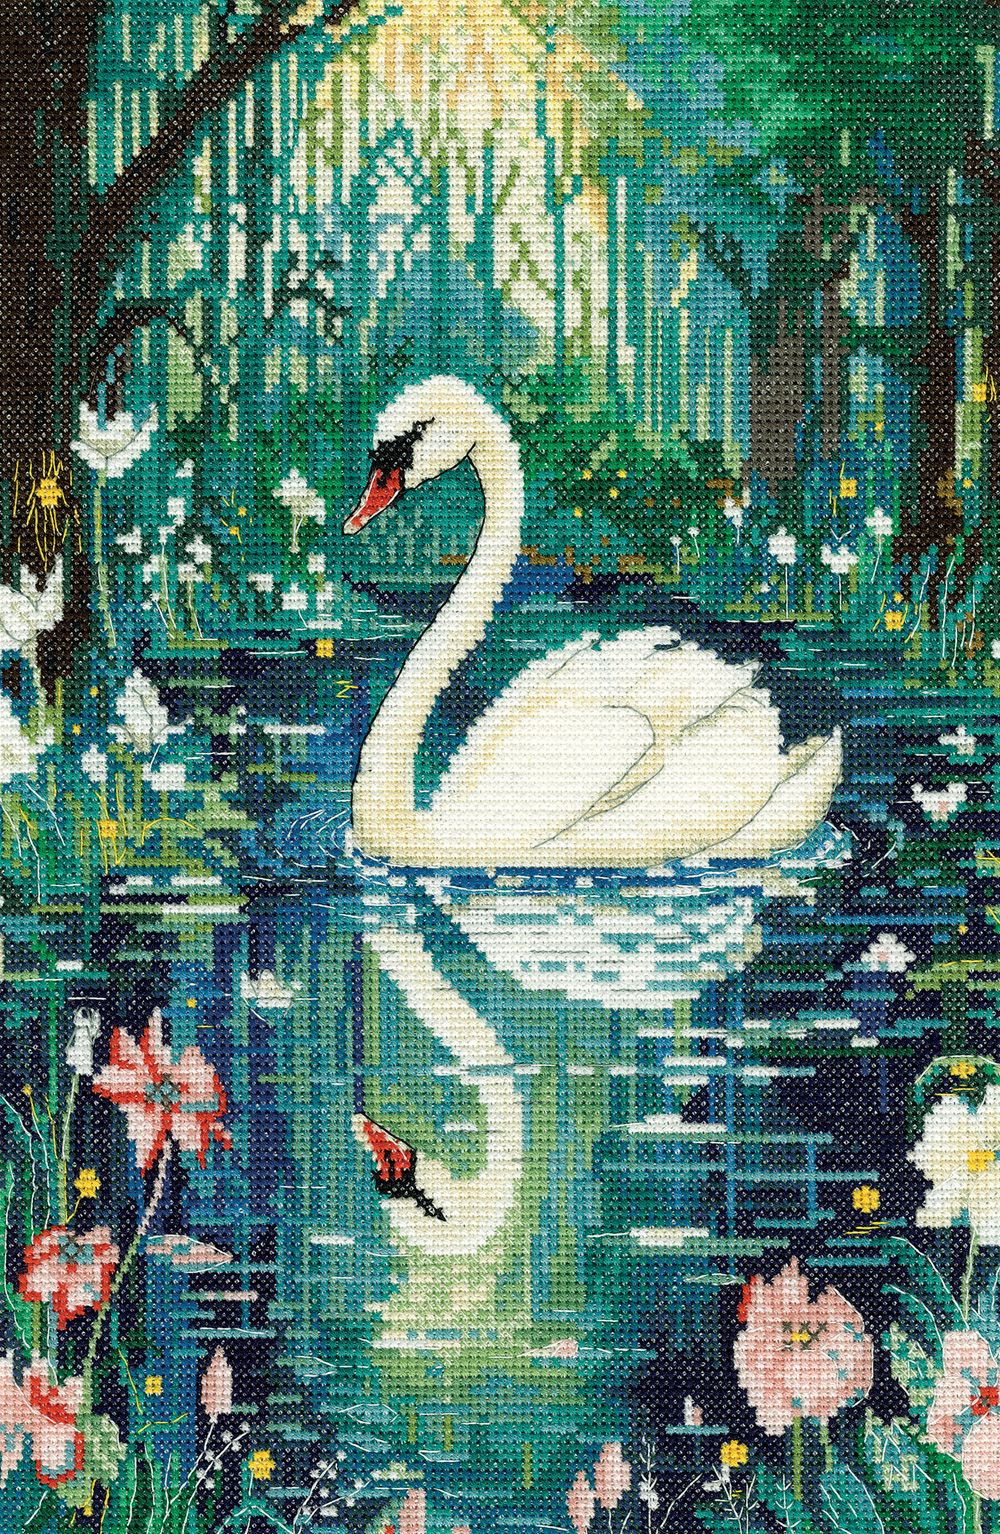 Tranquility Swan - Heritage Crafts Cross Stitch